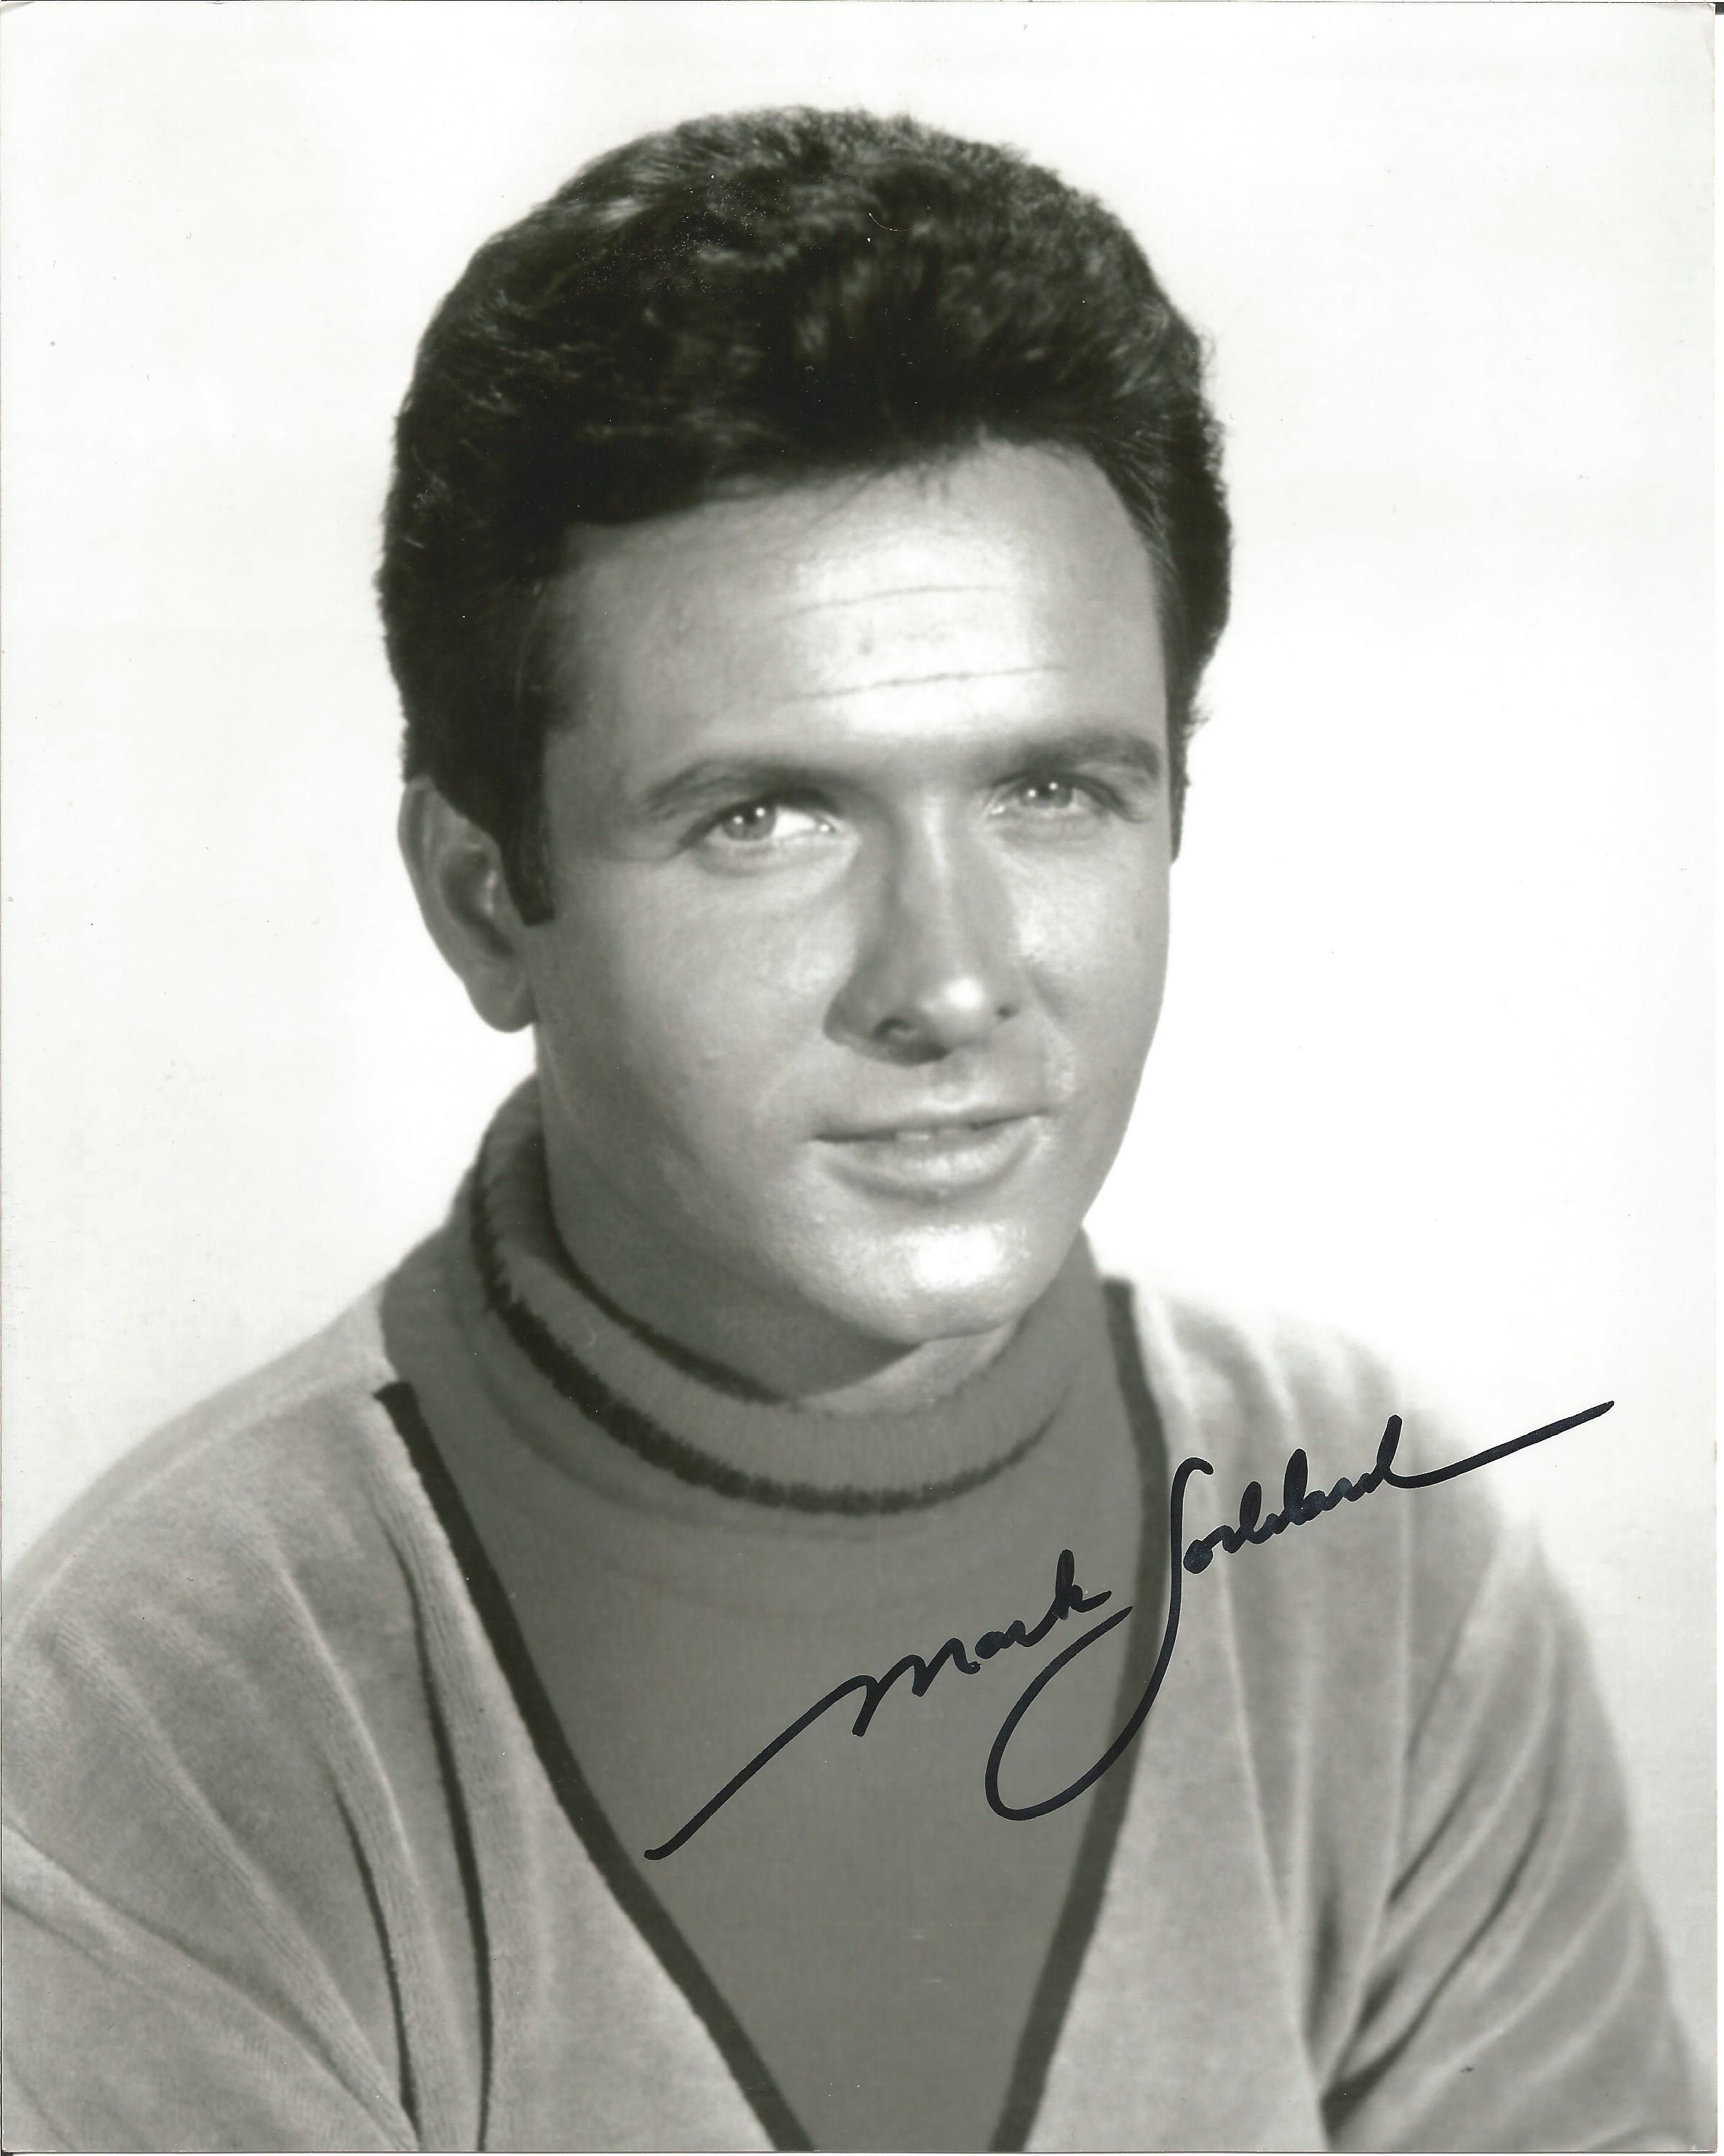 Mark Goddard Lost In Space hand signed 10x8 photo. This beautiful hand signed photo depicts Mark